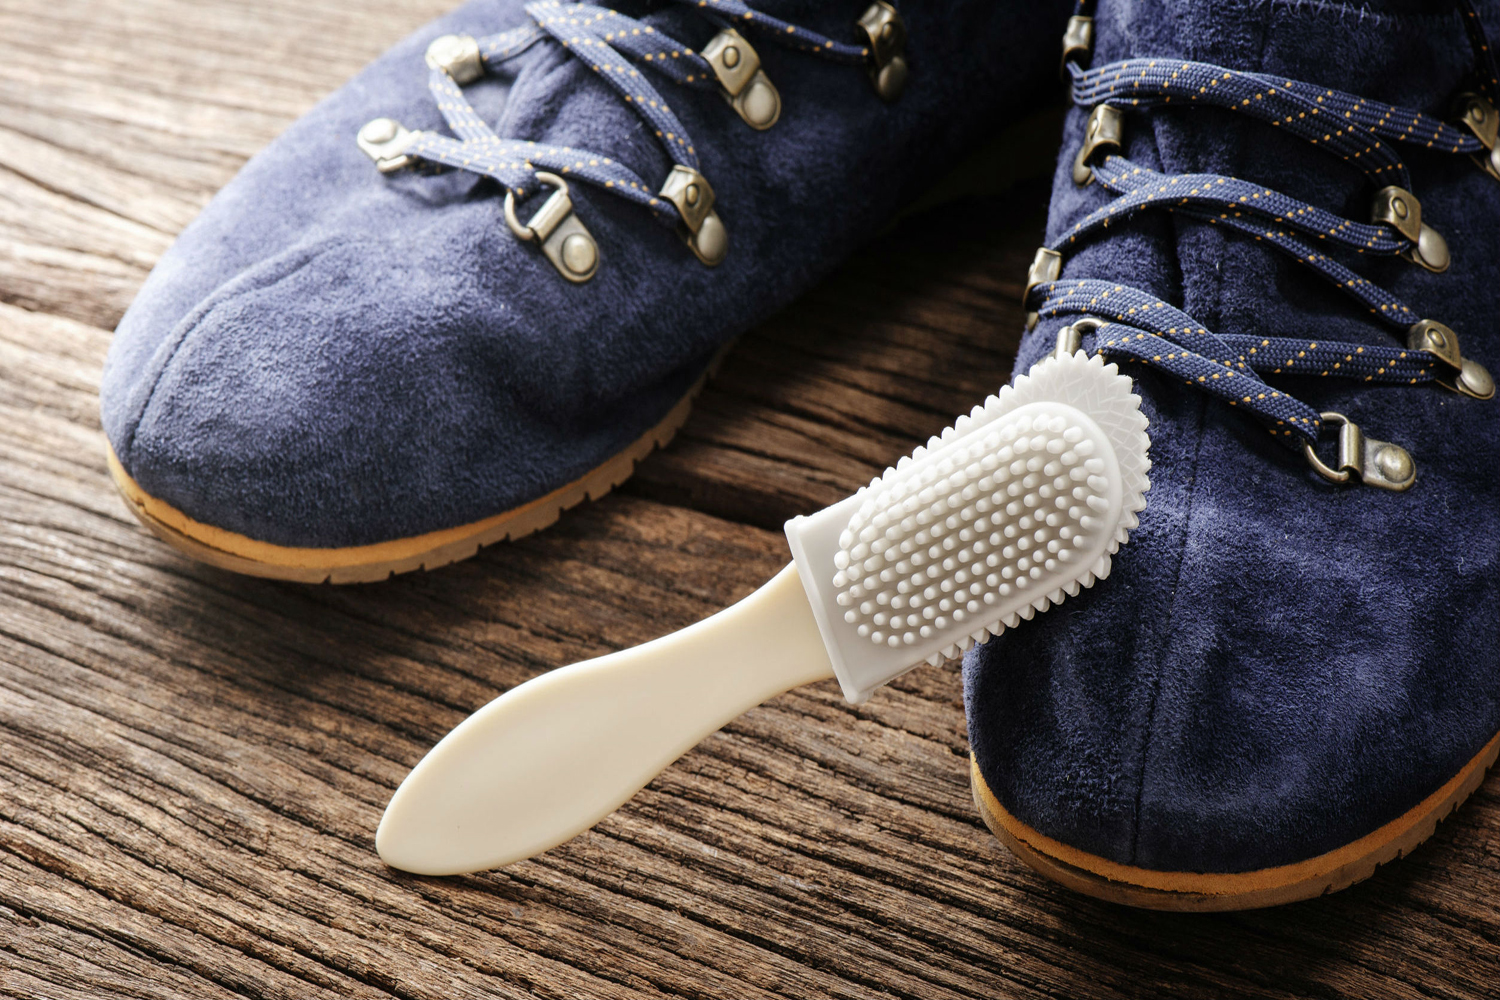 How to Clean Suede Shoes Correctly So They Don't Ruin | The Manual